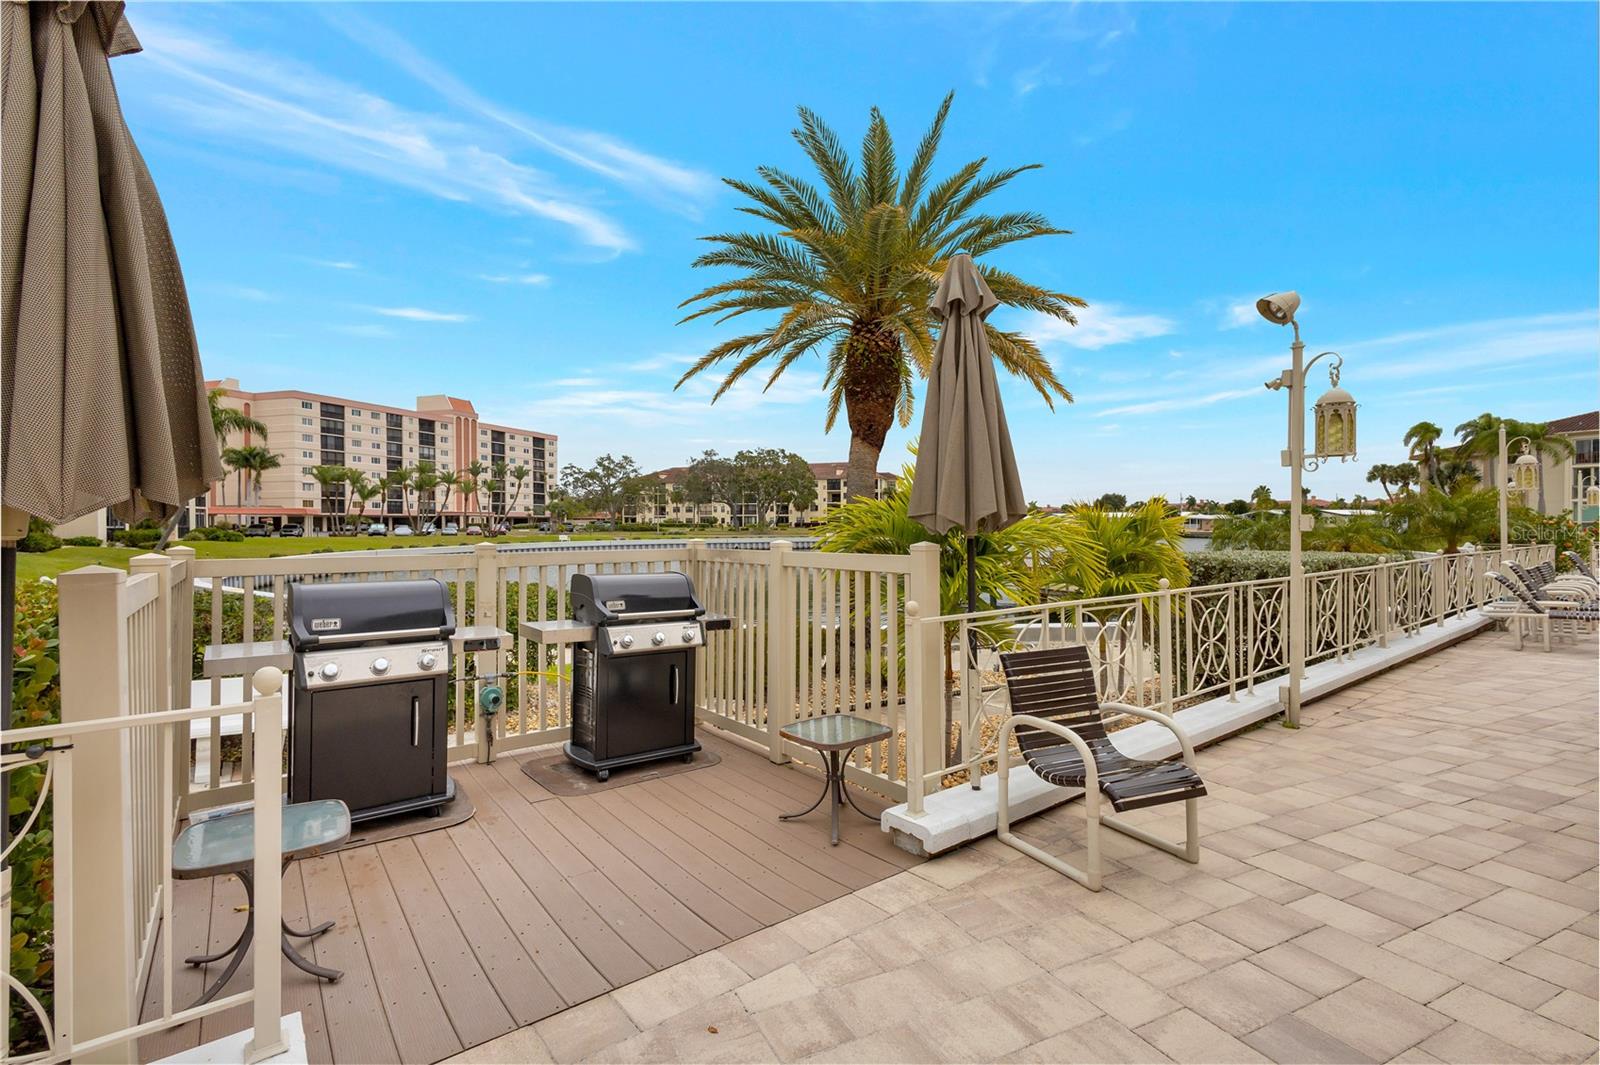 Patio parties and grilling.  See your building across the Cove